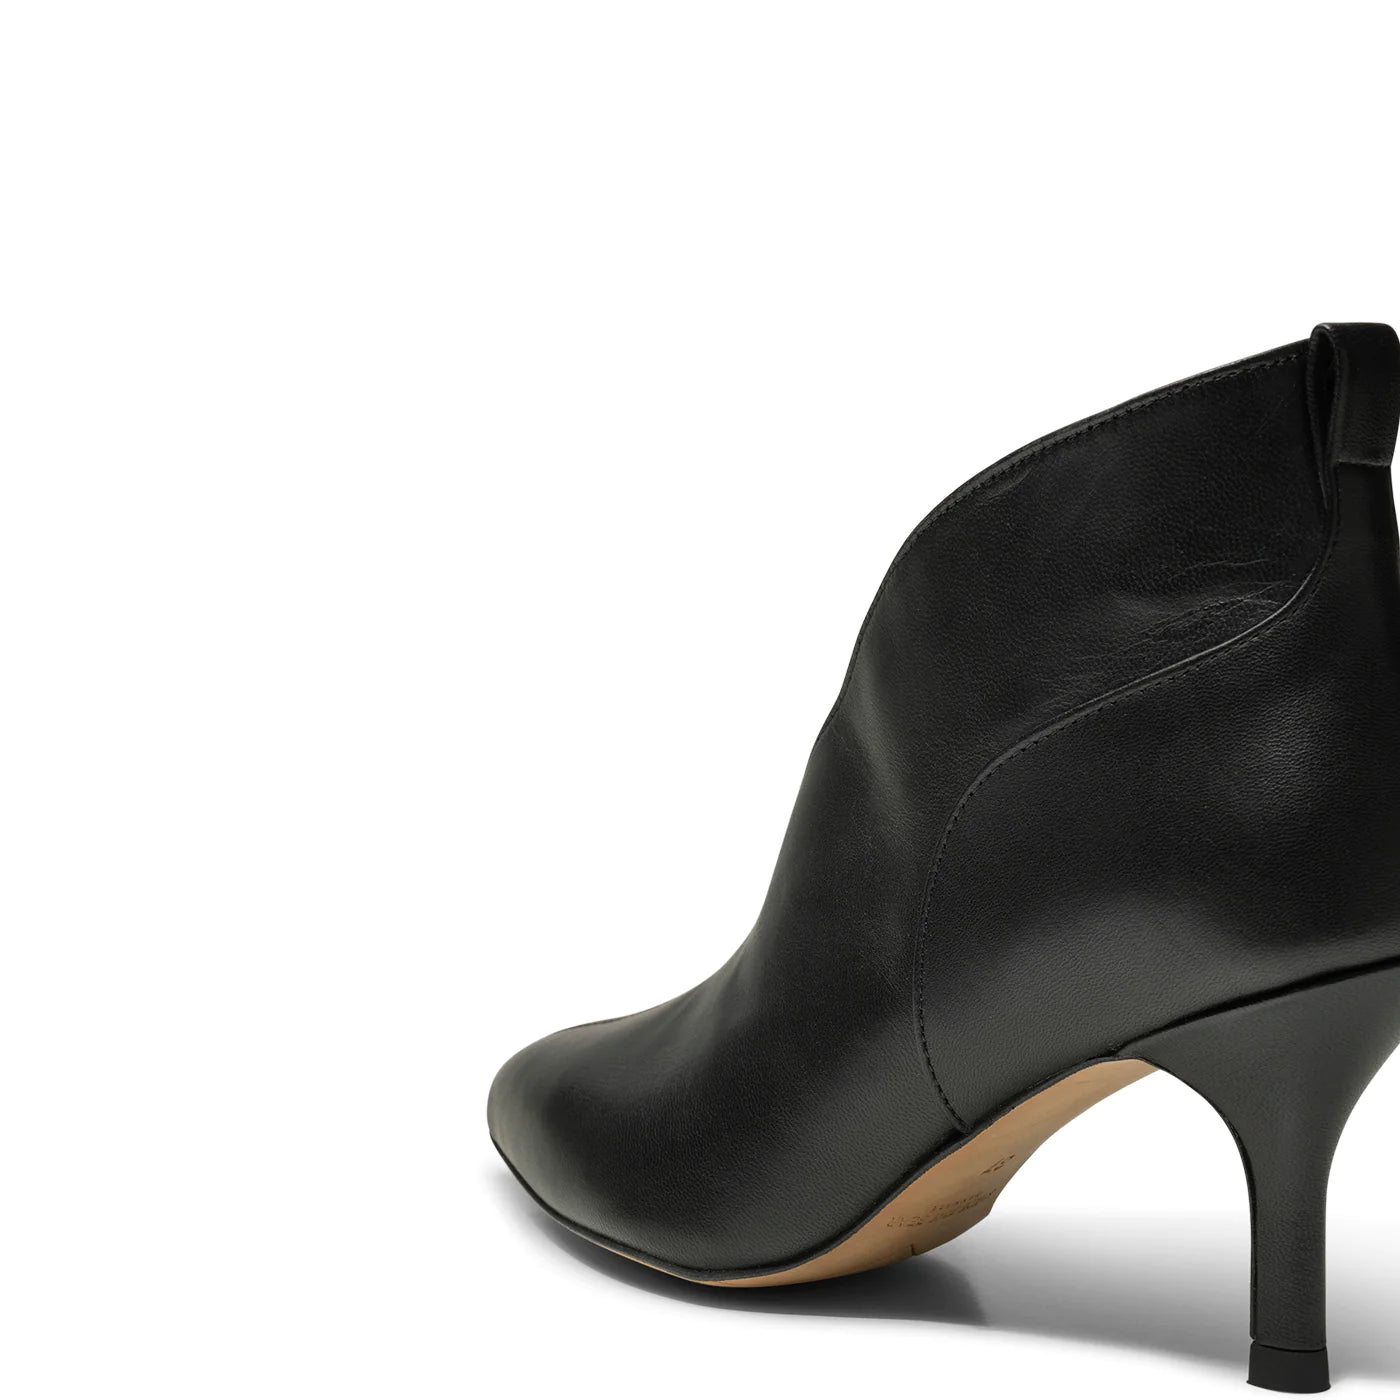 Shoe The Bear Valentine Bootie - Black Leather